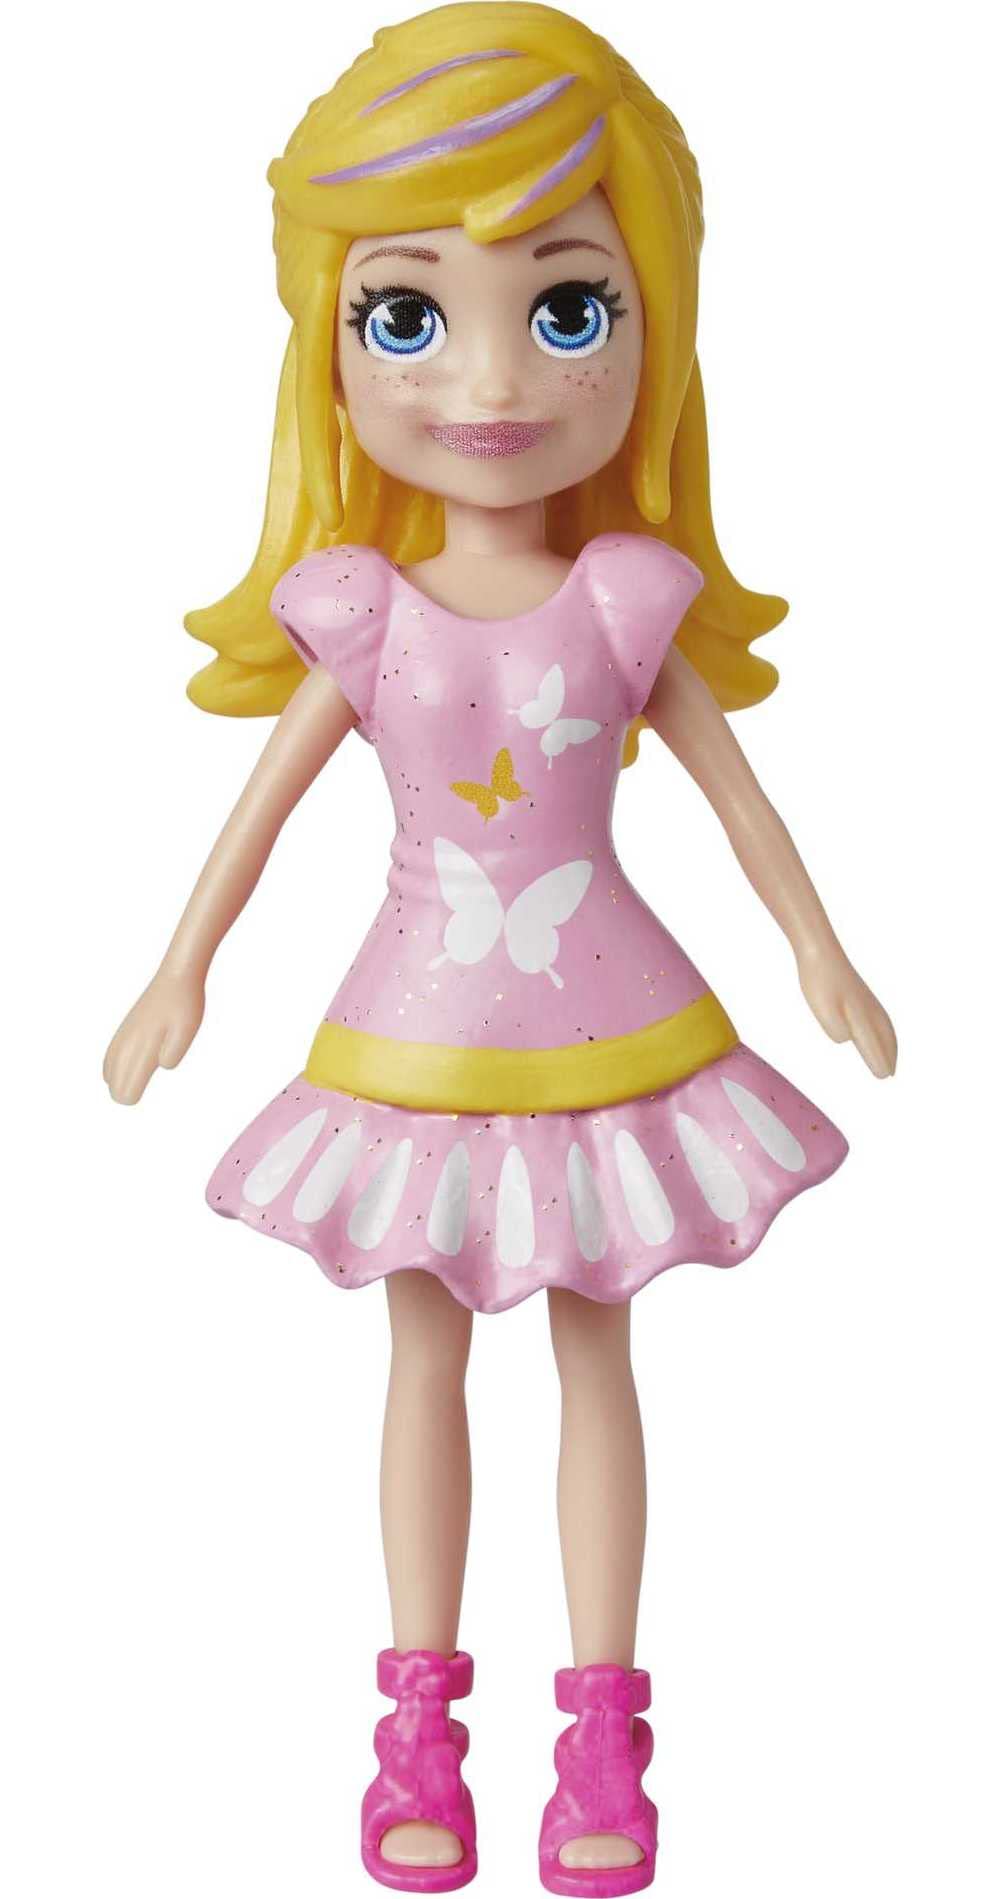 Polly Pocket Travel Toy with 3-Inch Doll and 18 Accessories, Puppy and Flower-Themed Fashion Pack